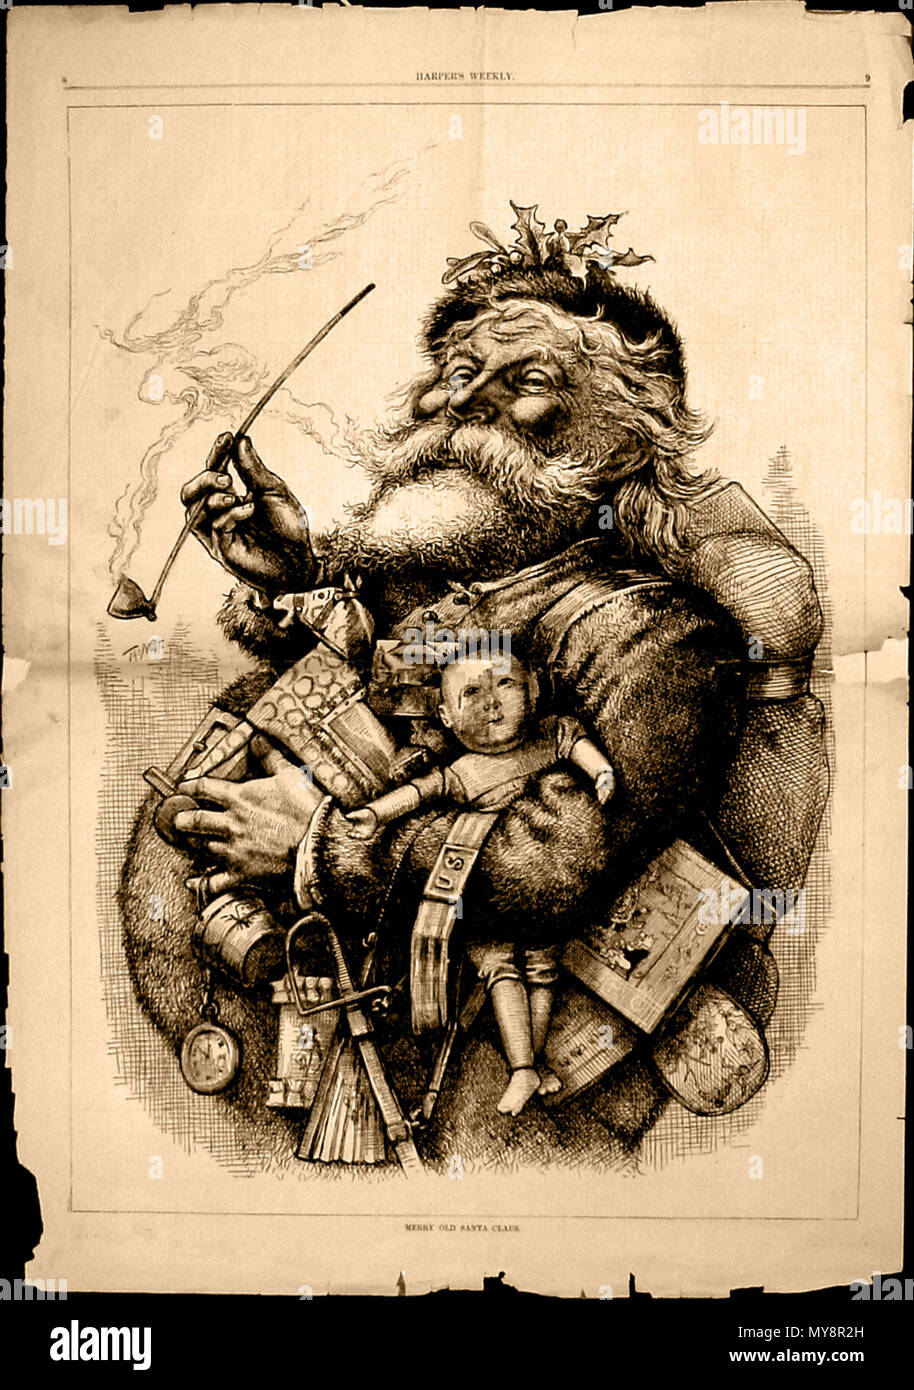 . English: Thomas Nast's most famous drawing, 'Merry Old Santa Claus', from the January 1, 1881 edition of Harper's Weekly. Thomas Nast immortalized Santa Claus' current look with an initial illustration in an 1863 issue of Harper's Weekly, as part of a large illustration titled 'A Christmas Furlough' in which Nast set aside his regular news and political coverage to do a Santa Claus drawing. The popularity of that image prompted him to create another illustration in 1881. 1 January 1881. Thomas Nast 9 1881 0101 tnast santa 200 Stock Photo